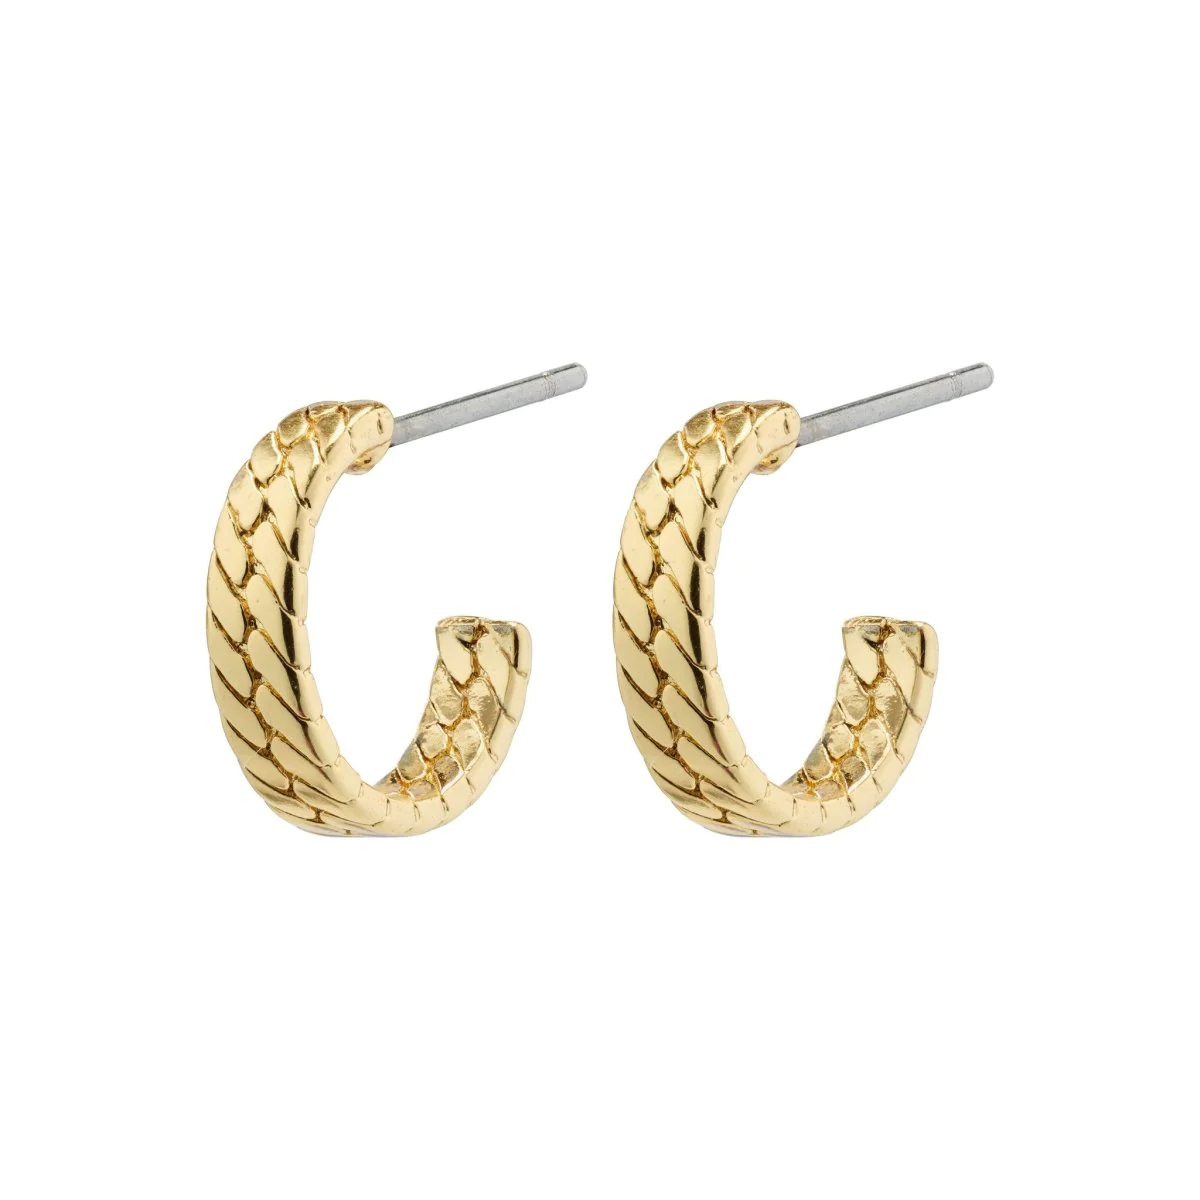 Pilgrim Joanna Hoops - Gold Accessories - Jewelry - Earrings by Pilgrim | Grace the Boutique